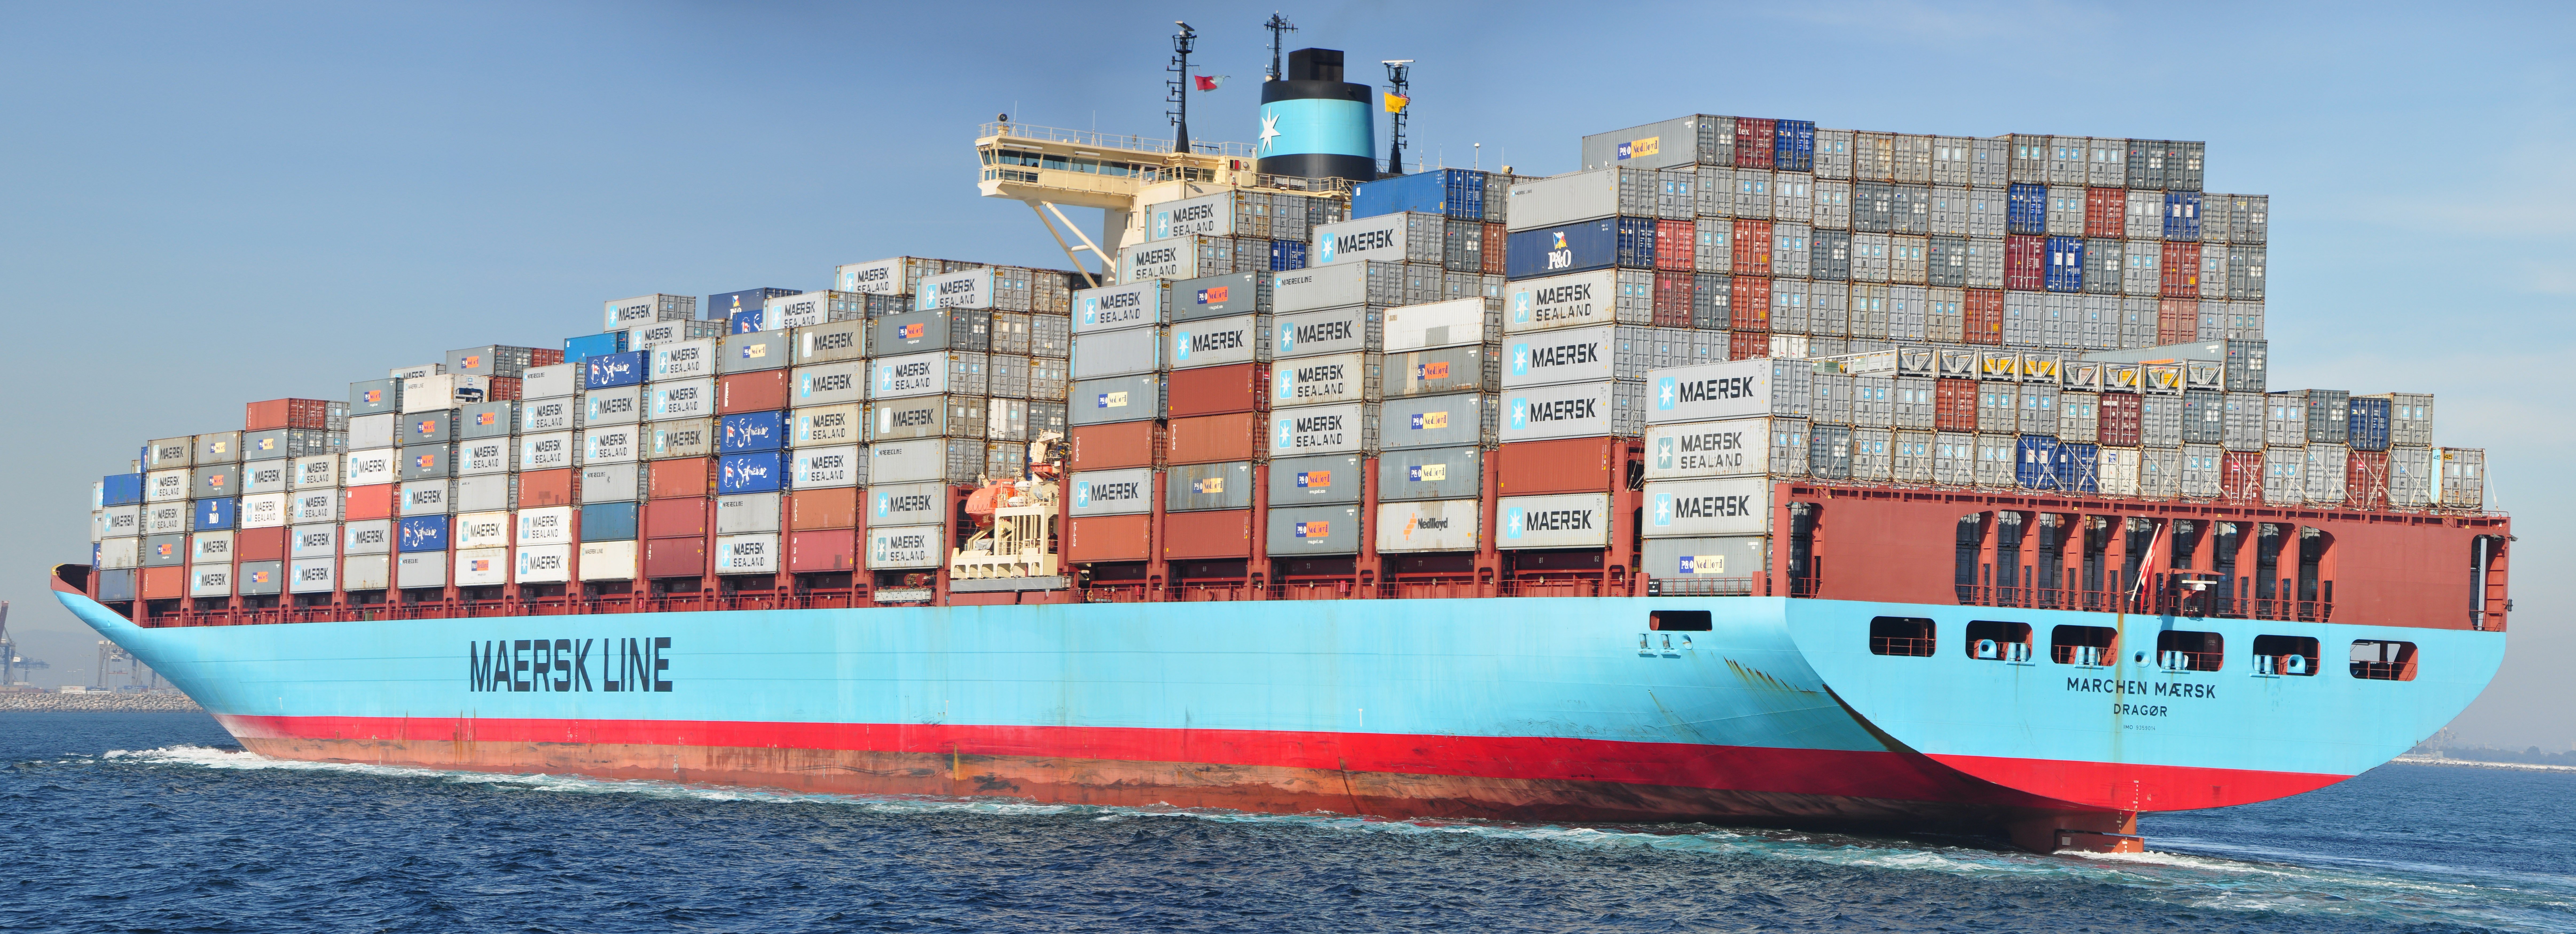 Maersk, Maersk Line, Cargo, Container ship, Dual monitors Wallpaper